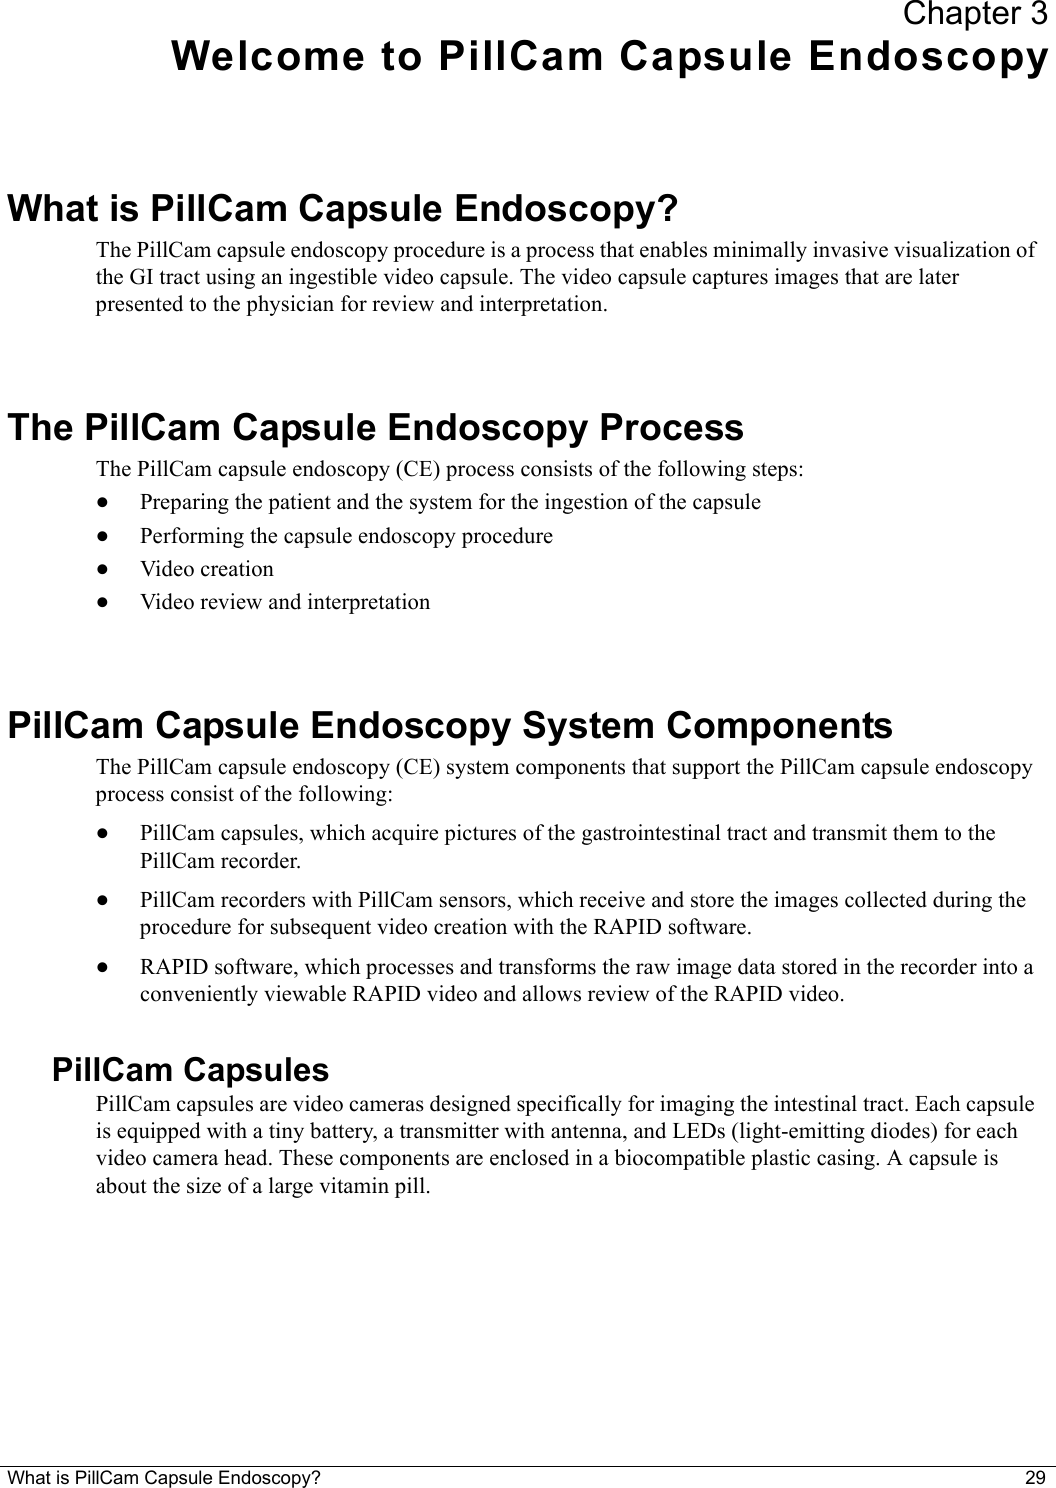 What is PillCam Capsule Endoscopy? 29 Chapter 3Welcome to PillCam Capsule EndoscopyWhat is PillCam Capsule Endoscopy?The PillCam capsule endoscopy procedure is a process that enables minimally invasive visualization of the GI tract using an ingestible video capsule. The video capsule captures images that are later presented to the physician for review and interpretation.The PillCam Capsule Endoscopy ProcessThe PillCam capsule endoscopy (CE) process consists of the following steps:•Preparing the patient and the system for the ingestion of the capsule•Performing the capsule endoscopy procedure•Video creation•Video review and interpretationPillCam Capsule Endoscopy System ComponentsThe PillCam capsule endoscopy (CE) system components that support the PillCam capsule endoscopy process consist of the following: •PillCam capsules, which acquire pictures of the gastrointestinal tract and transmit them to the PillCam recorder.•PillCam recorders with PillCam sensors, which receive and store the images collected during the procedure for subsequent video creation with the RAPID software.•RAPID software, which processes and transforms the raw image data stored in the recorder into a conveniently viewable RAPID video and allows review of the RAPID video.PillCam CapsulesPillCam capsules are video cameras designed specifically for imaging the intestinal tract. Each capsule is equipped with a tiny battery, a transmitter with antenna, and LEDs (light-emitting diodes) for each video camera head. These components are enclosed in a biocompatible plastic casing. A capsule is about the size of a large vitamin pill.